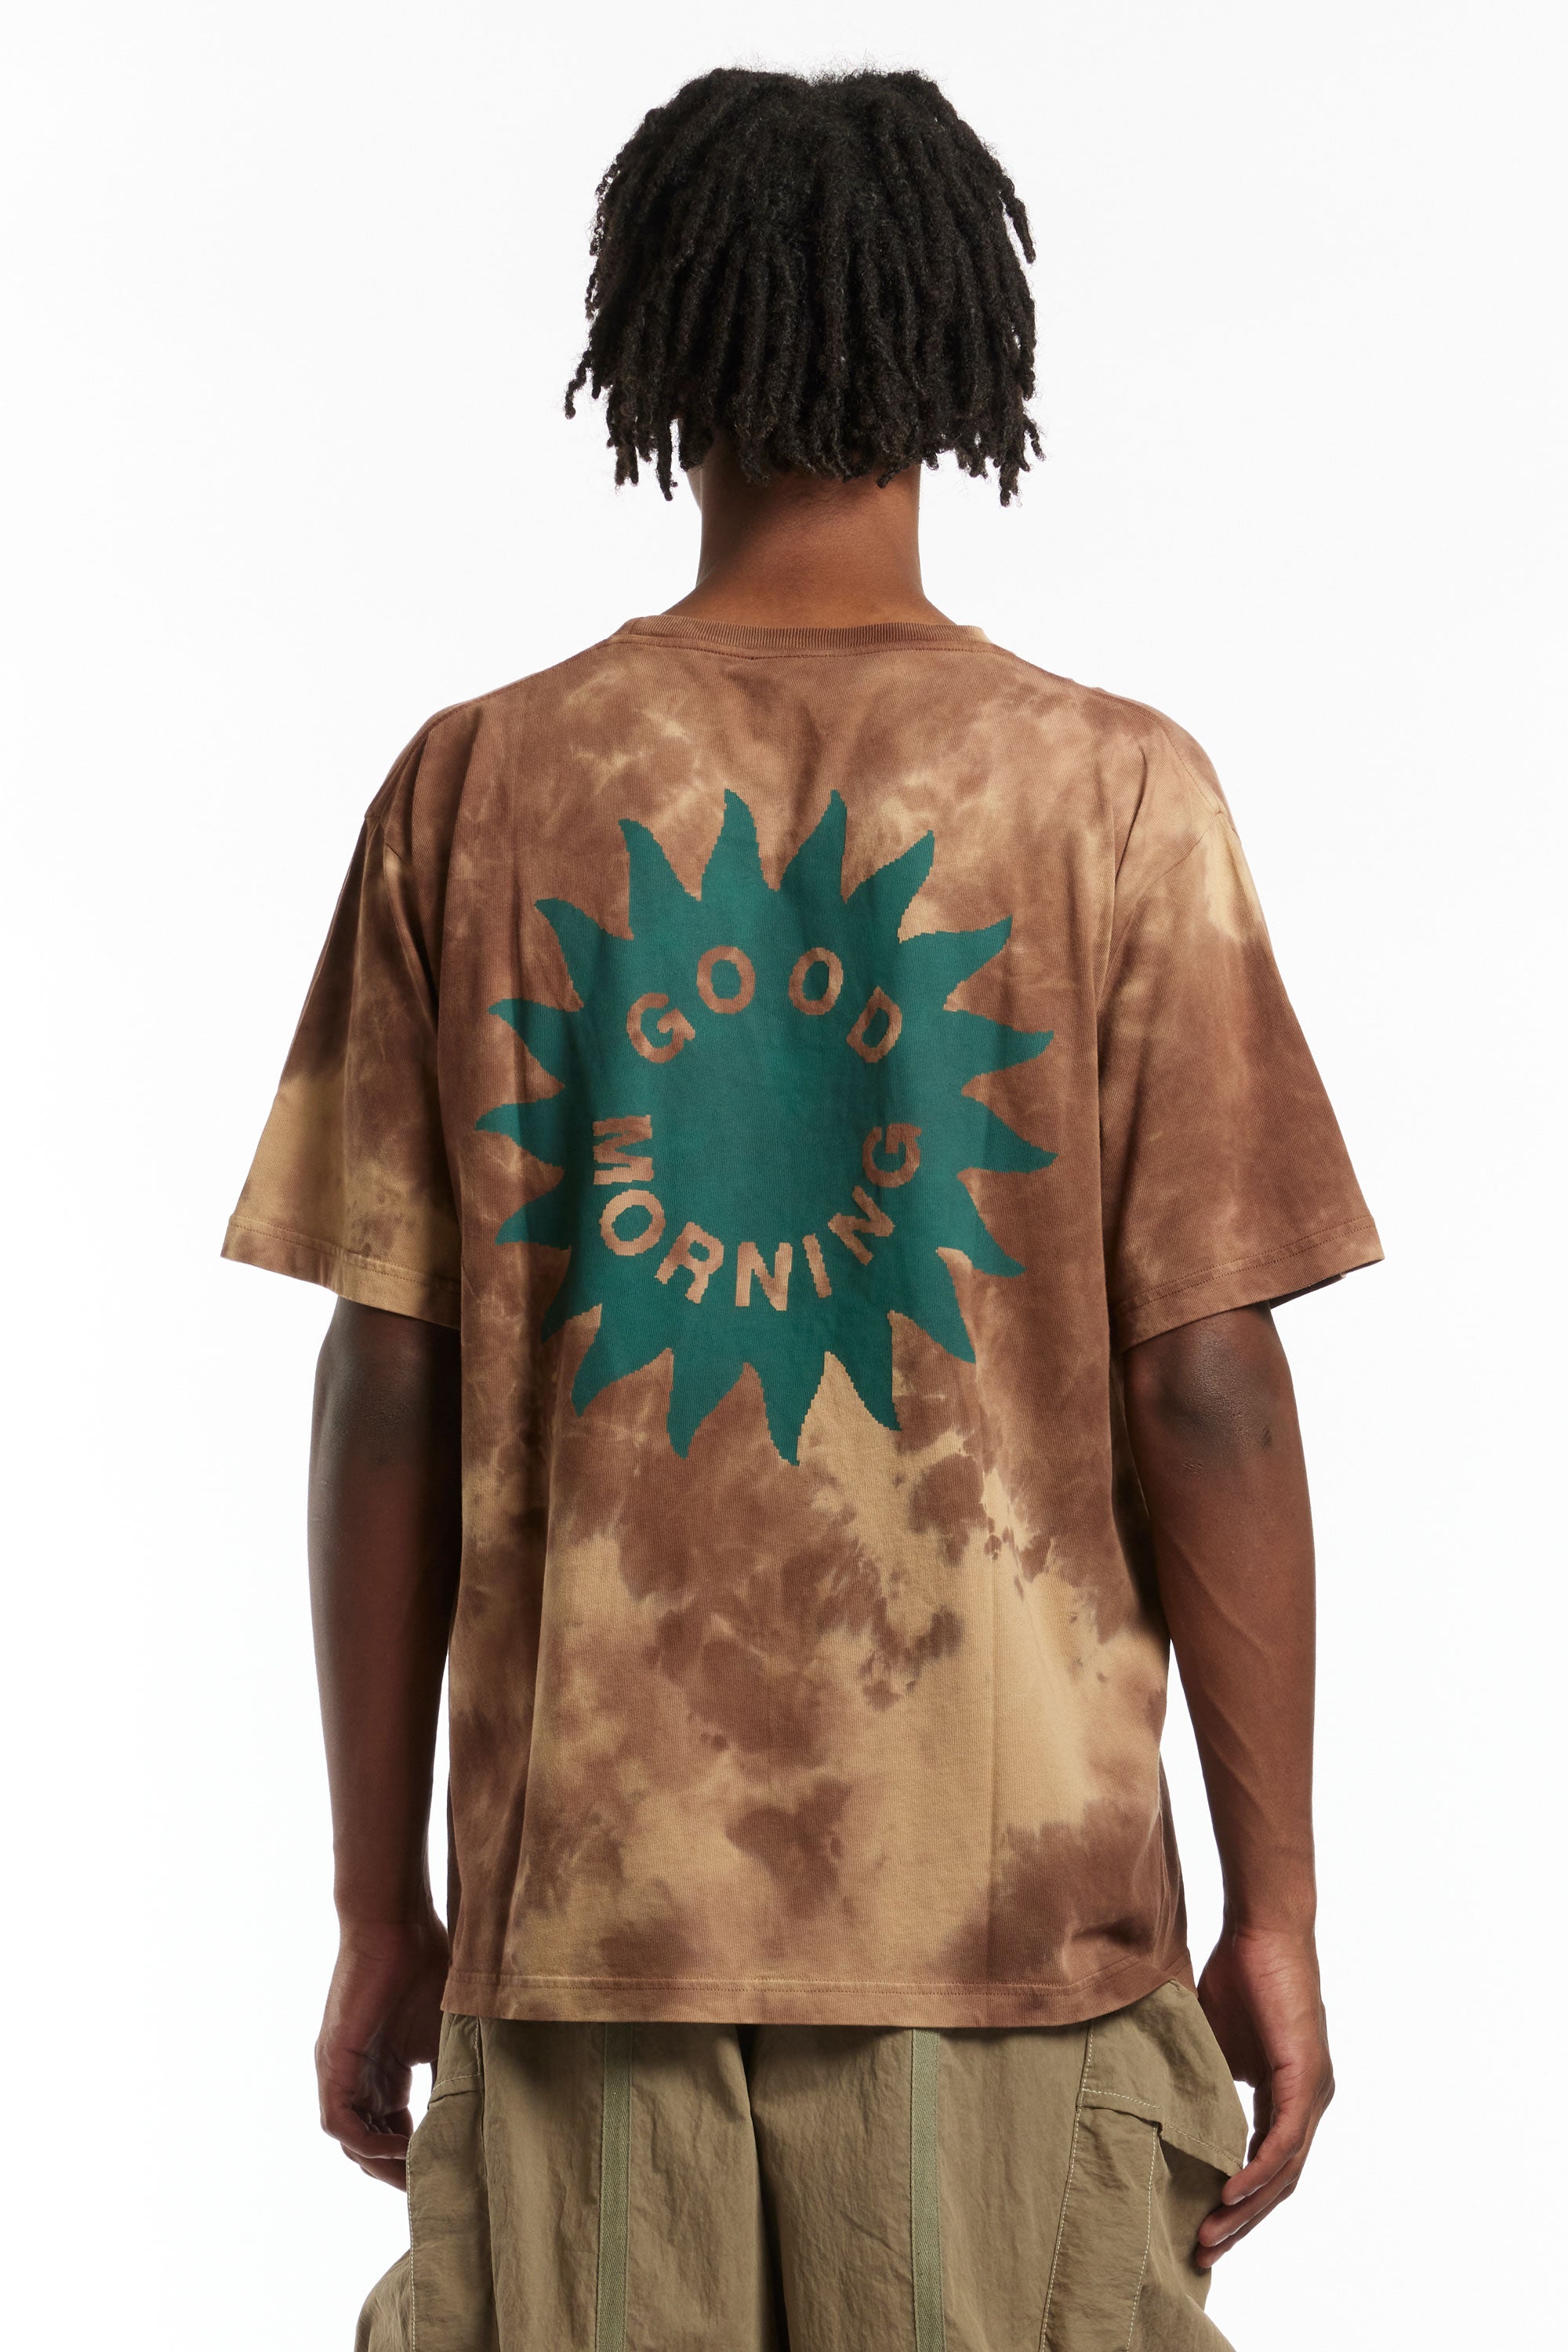 The GOOD MORNING TAPES - SUN LOGO EARTH DYE SS TEE  available online with global shipping, and in PAM Stores Melbourne and Sydney.